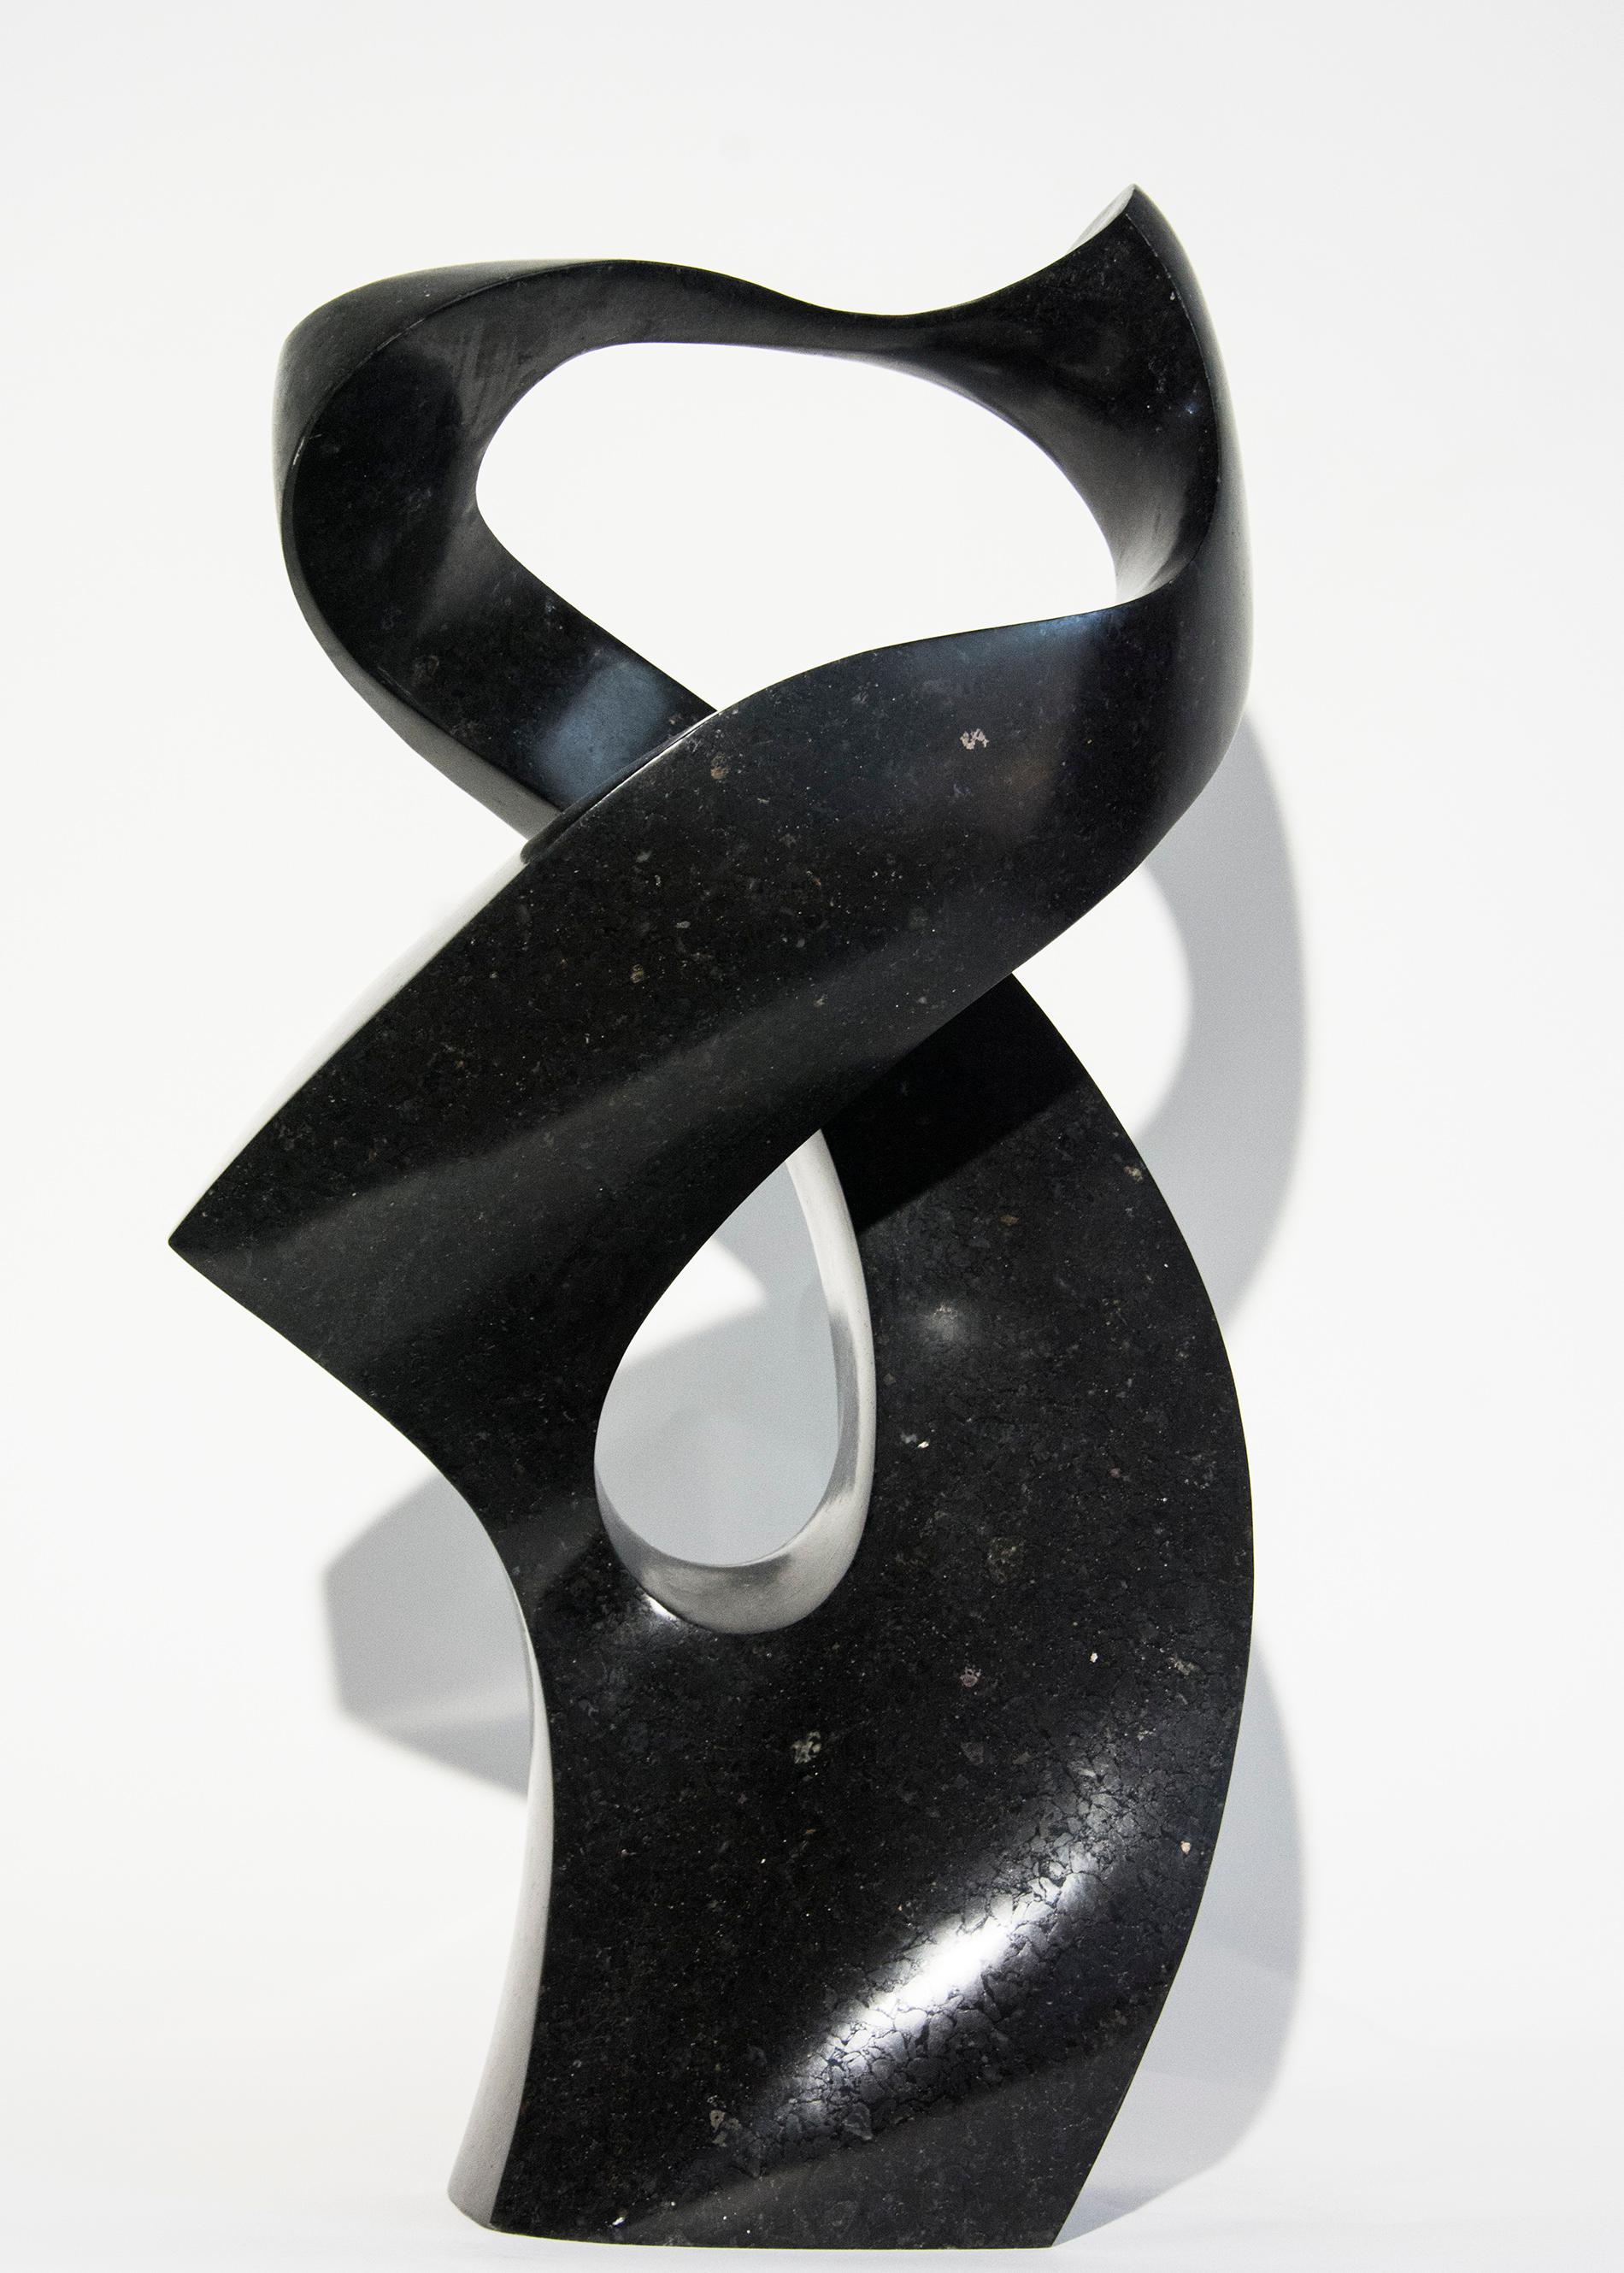 Jeremy Guy Abstract Sculpture - Embrace 4/50 - dark, smooth, polished, abstract, black granite sculpture